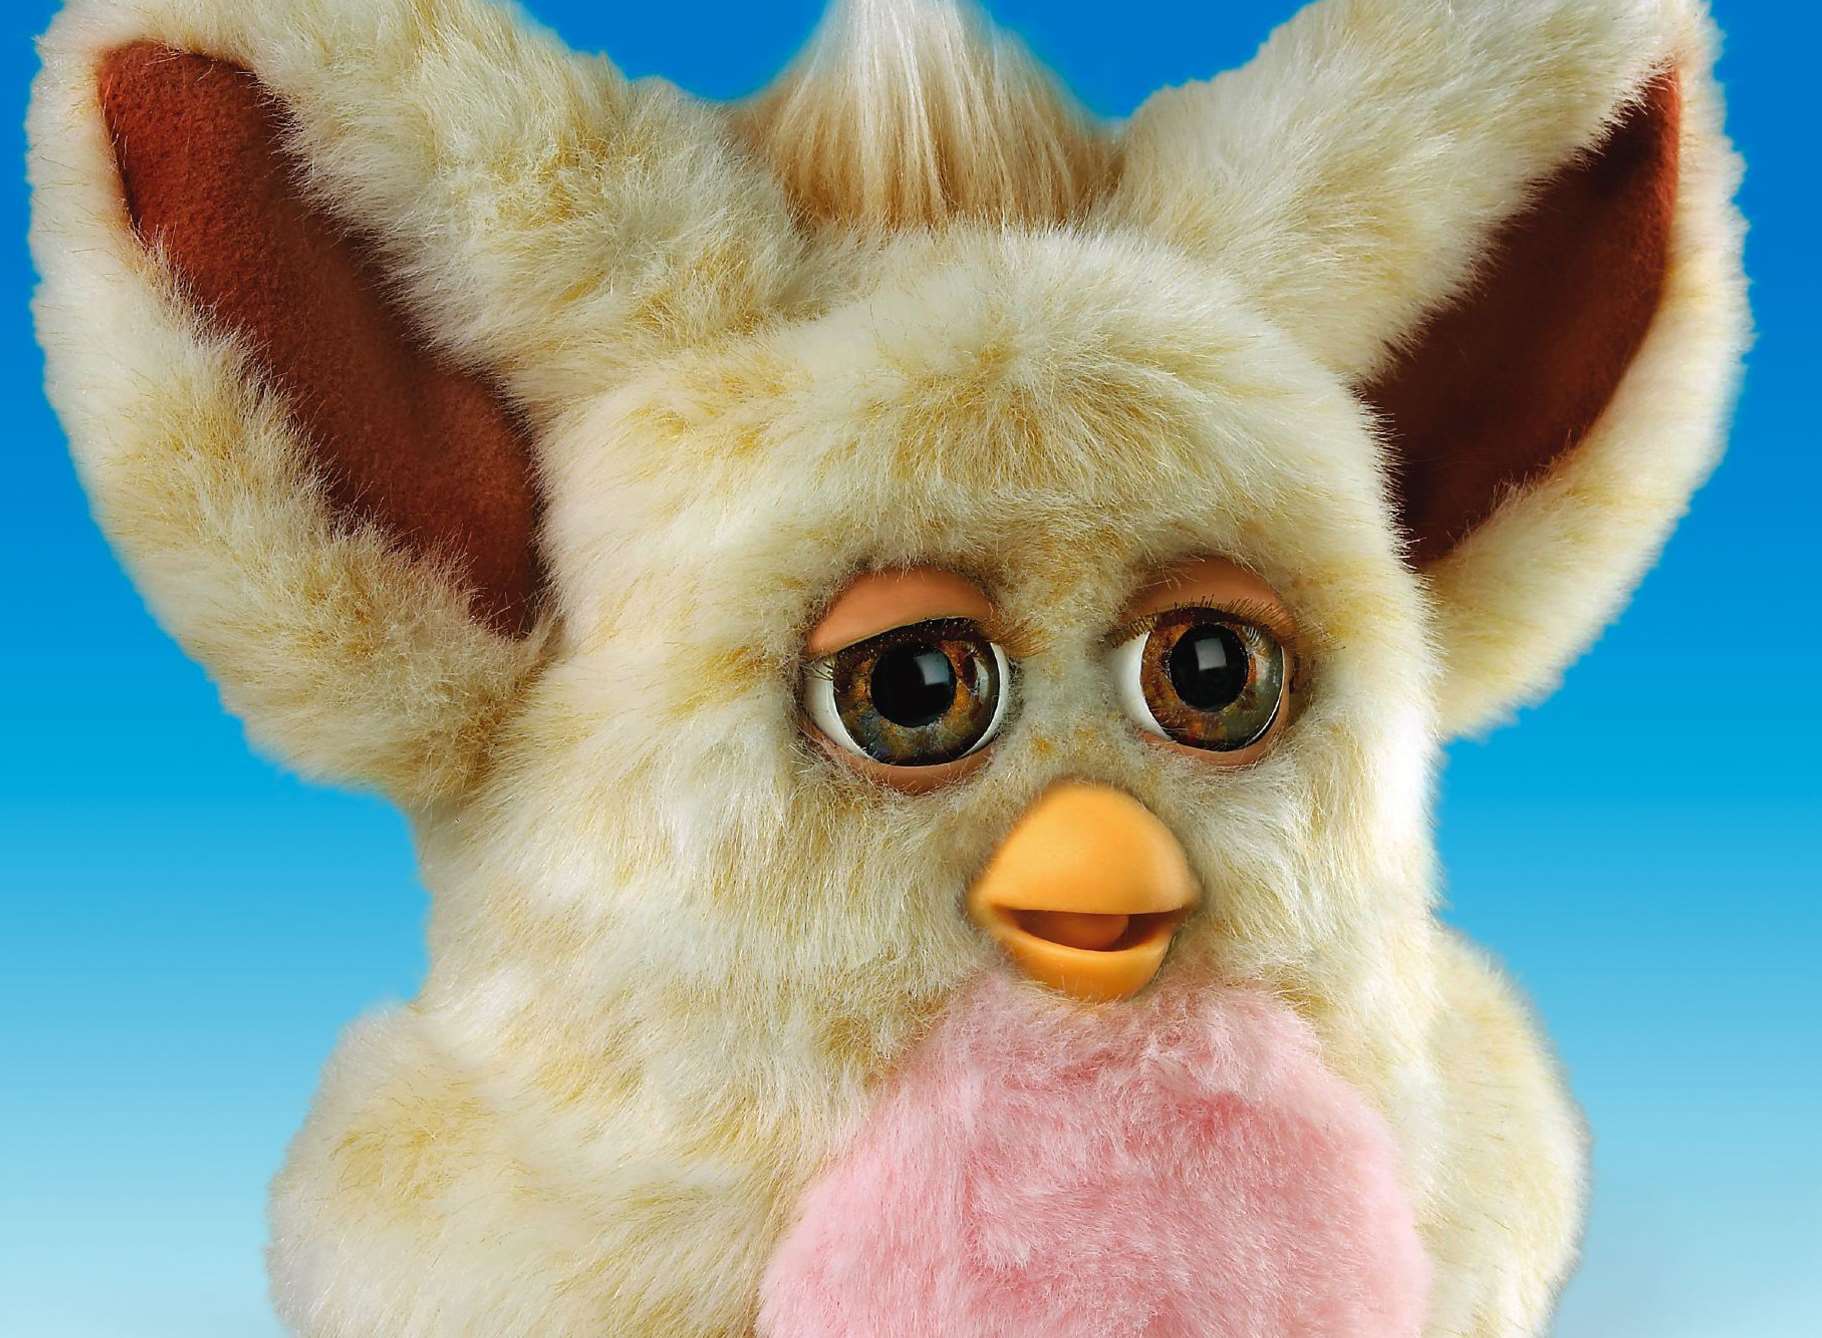 Do you remember the Furby? It was huge in the 1990s